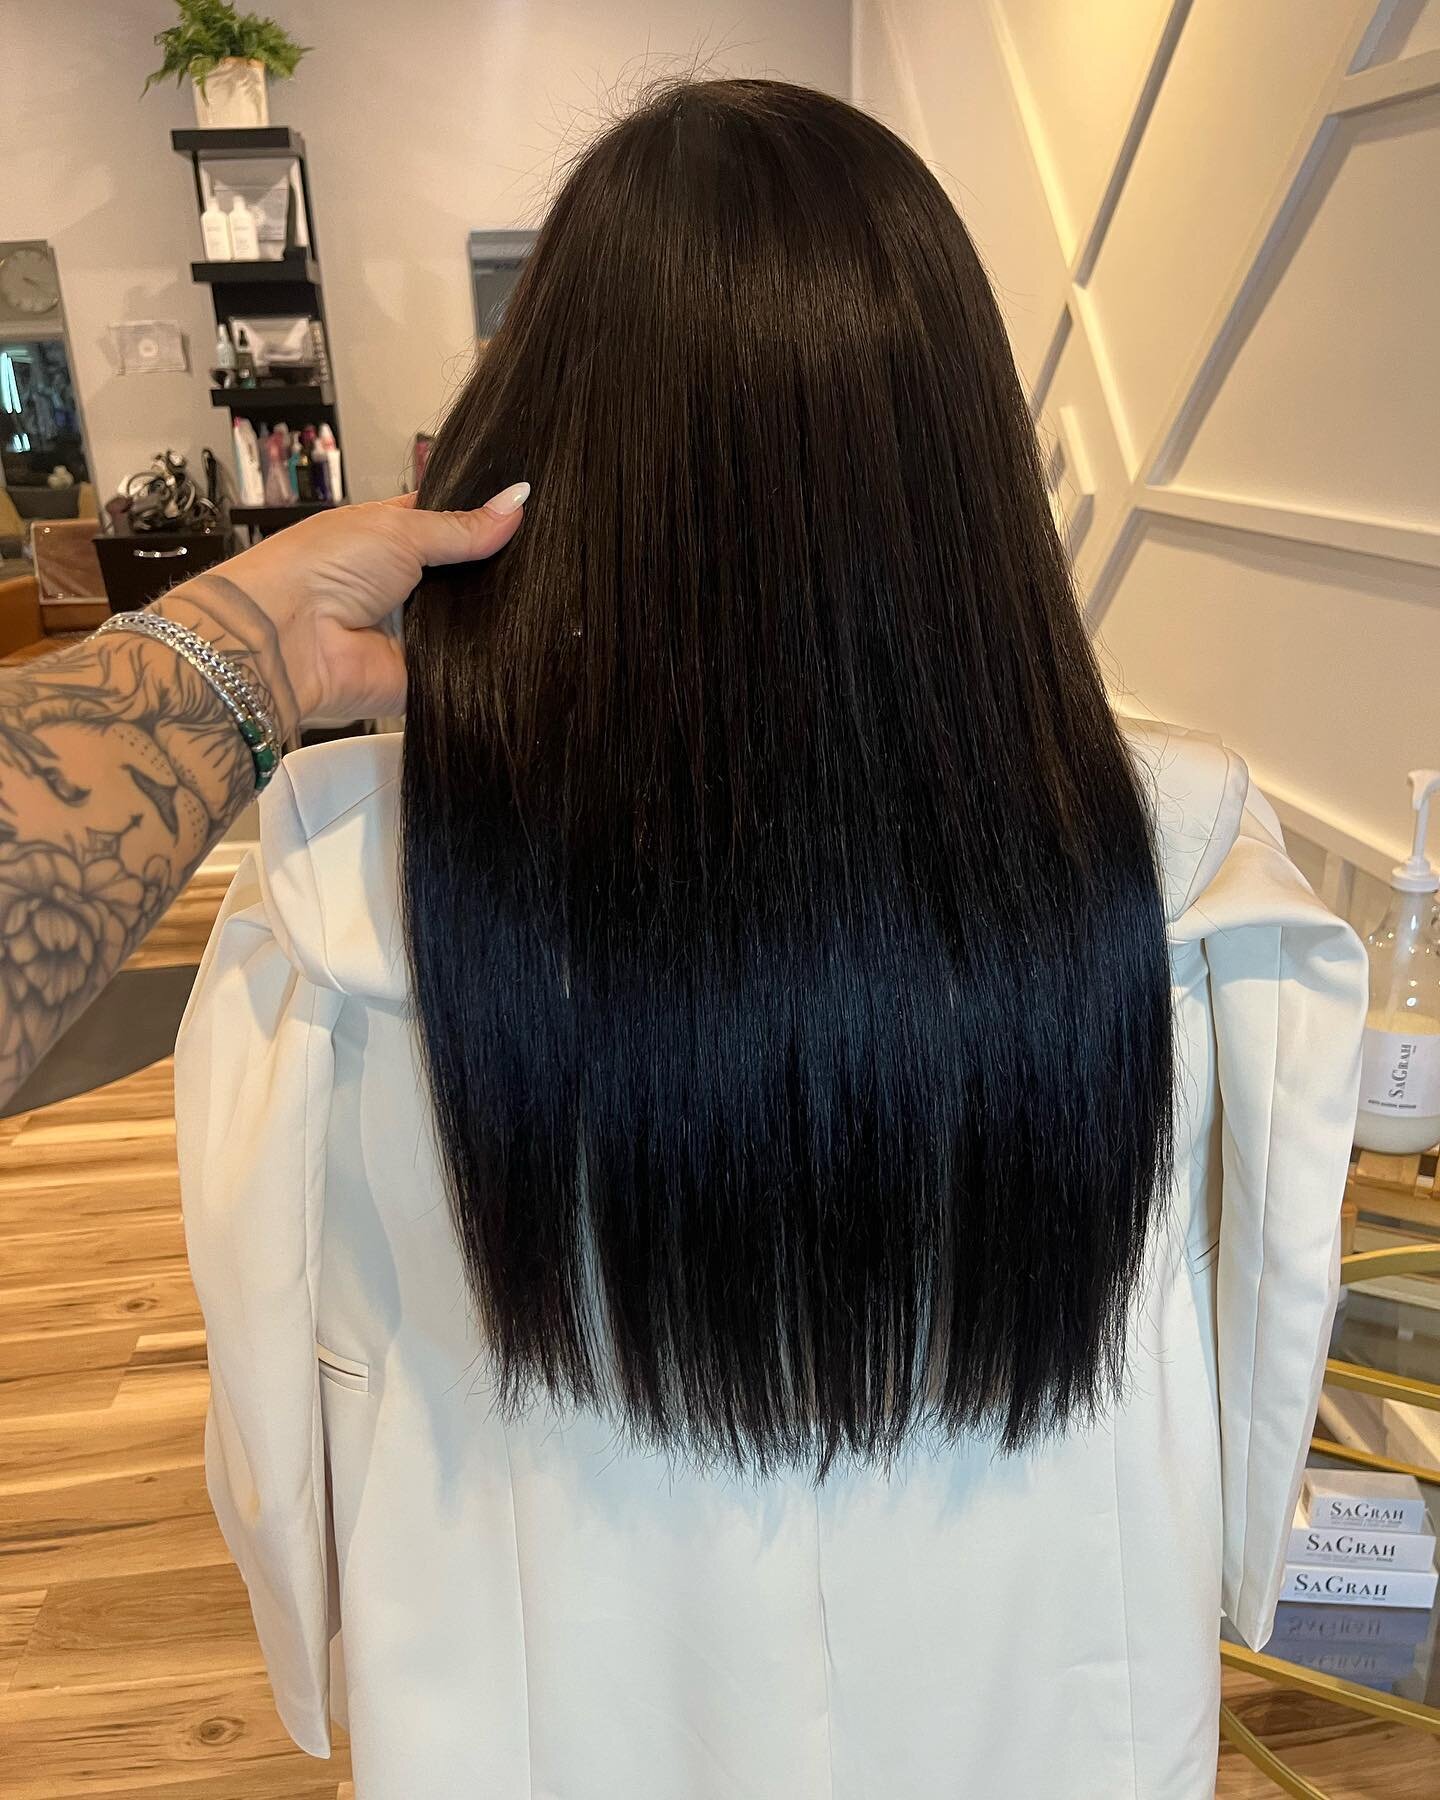 This Before &amp; After ⚡️
.
.
.
.
.
@sagrahbeauty LUXE handtied 18inches of black sands beach ❤️